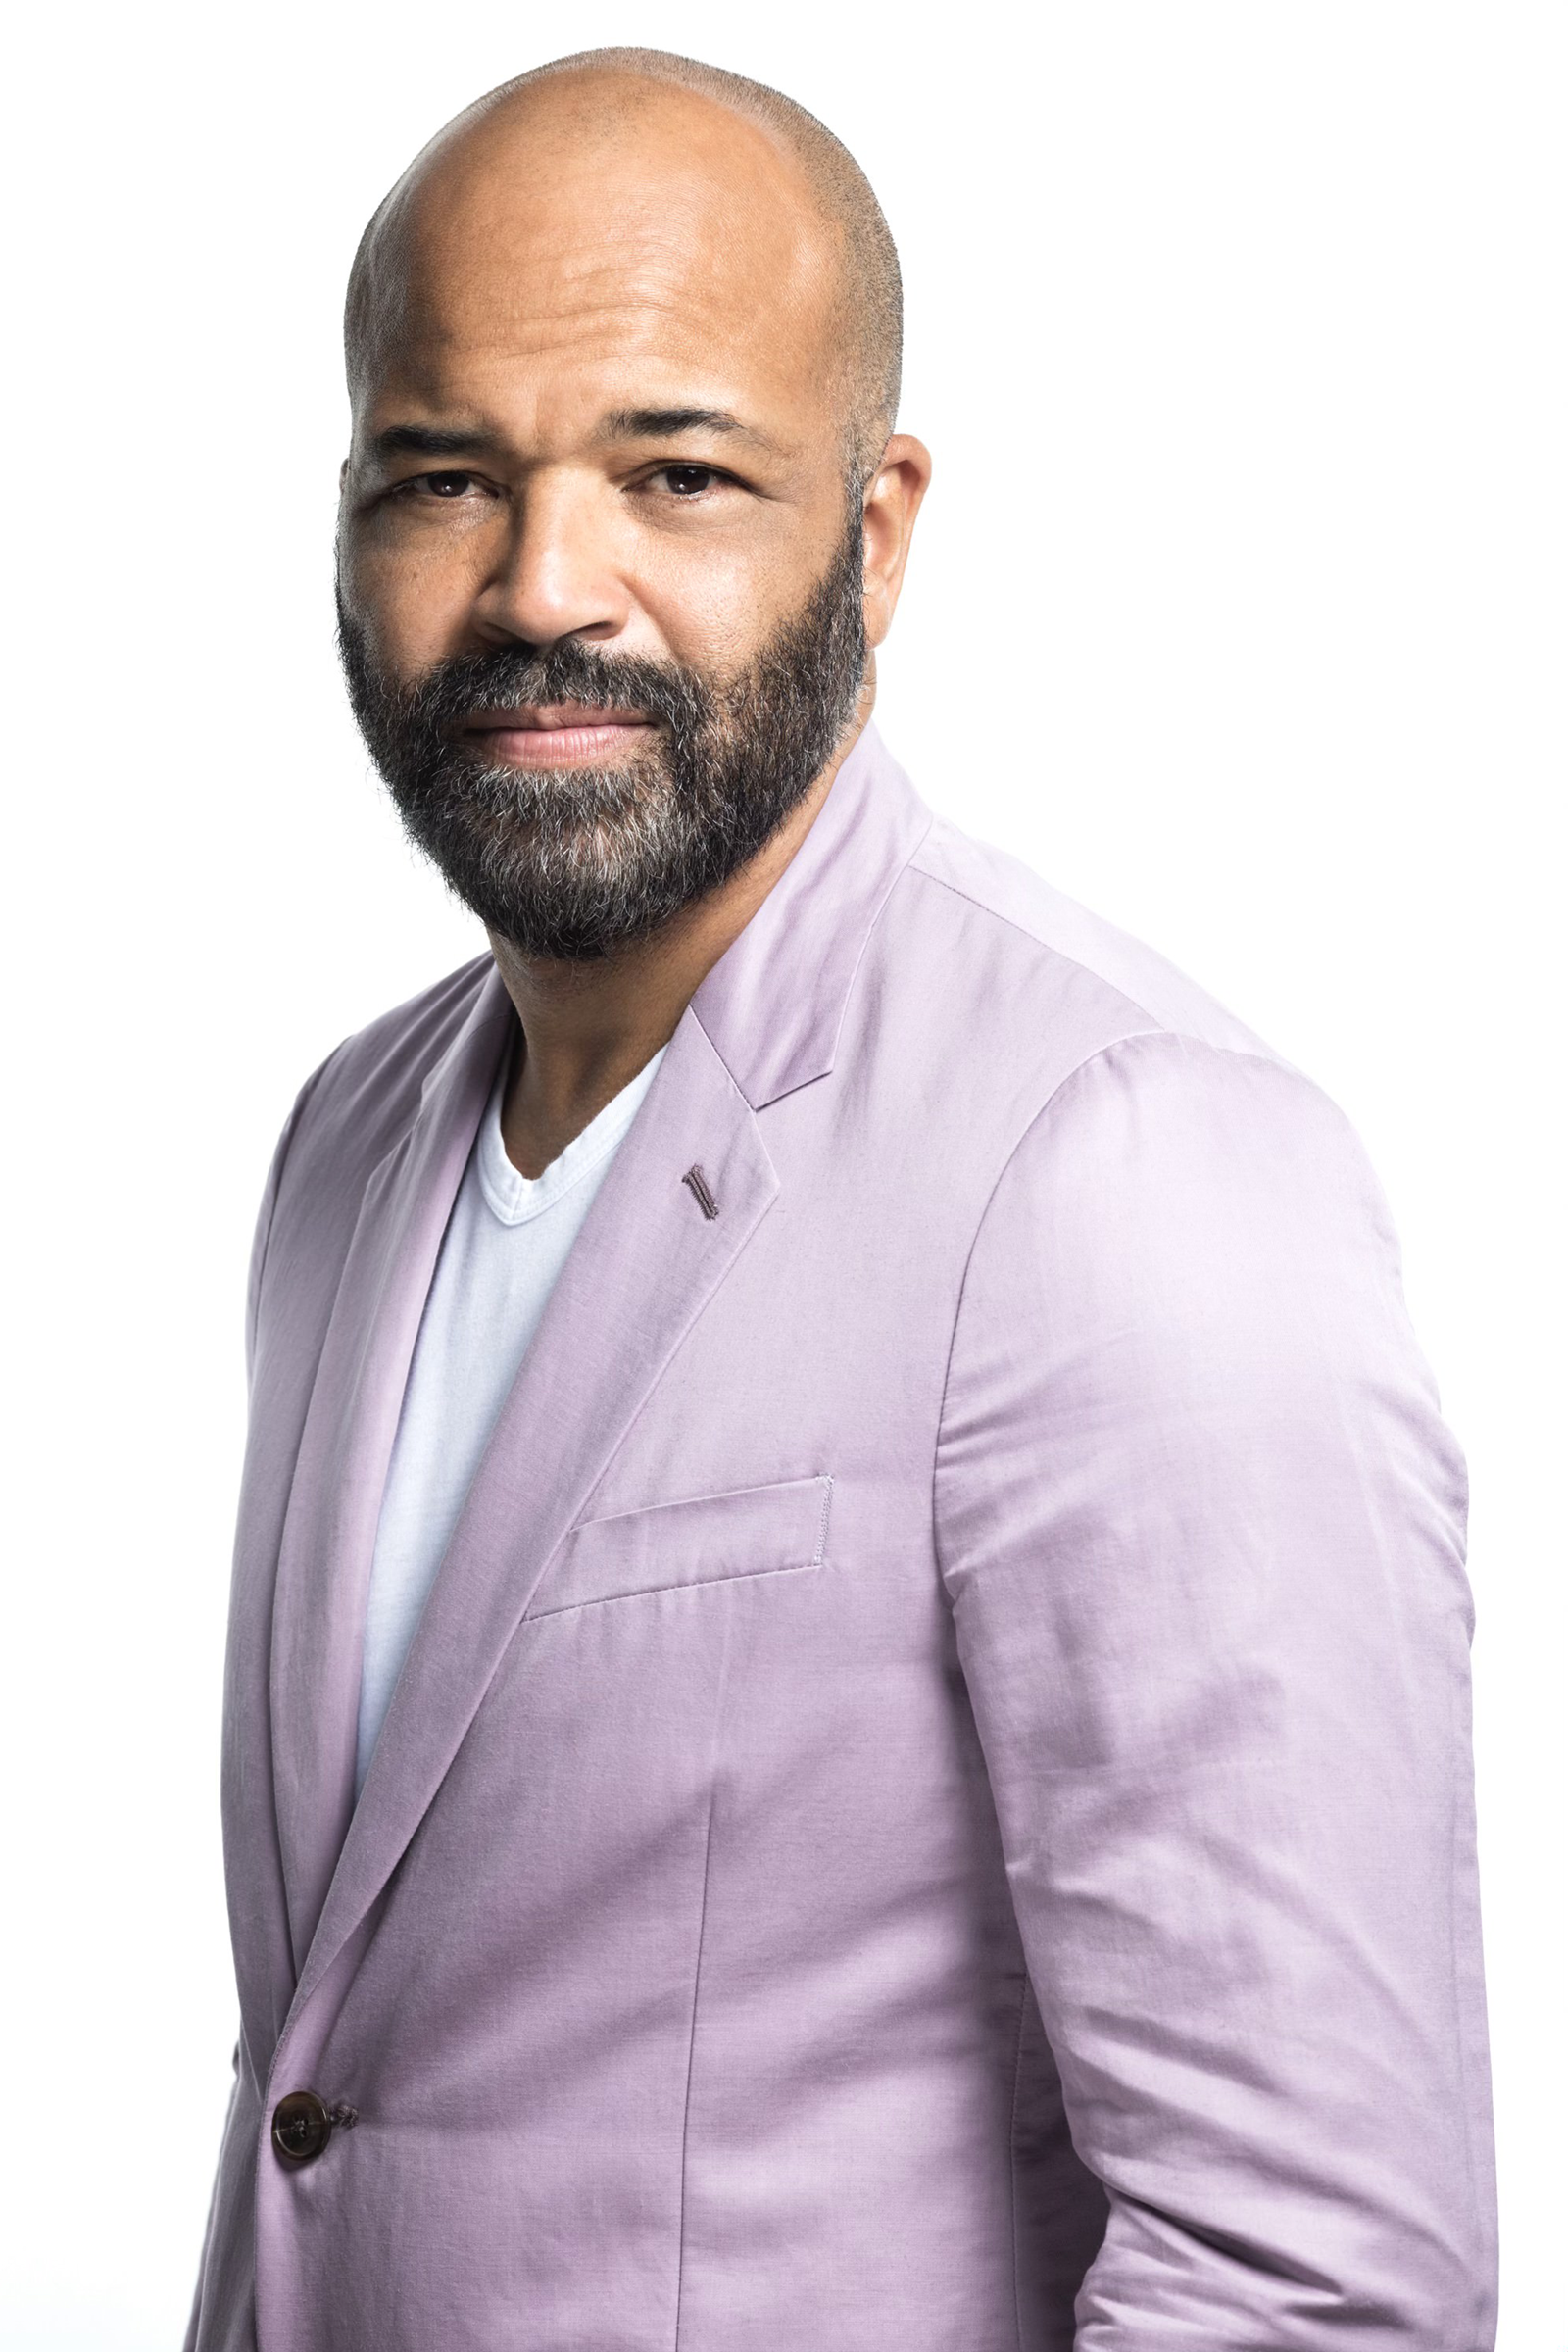 PALM SPRINGS INTERNATIONAL FILM AWARDS TO HONOR JEFFREY WRIGHT WITH THE CAREER ACHIEVEMENT AWARD